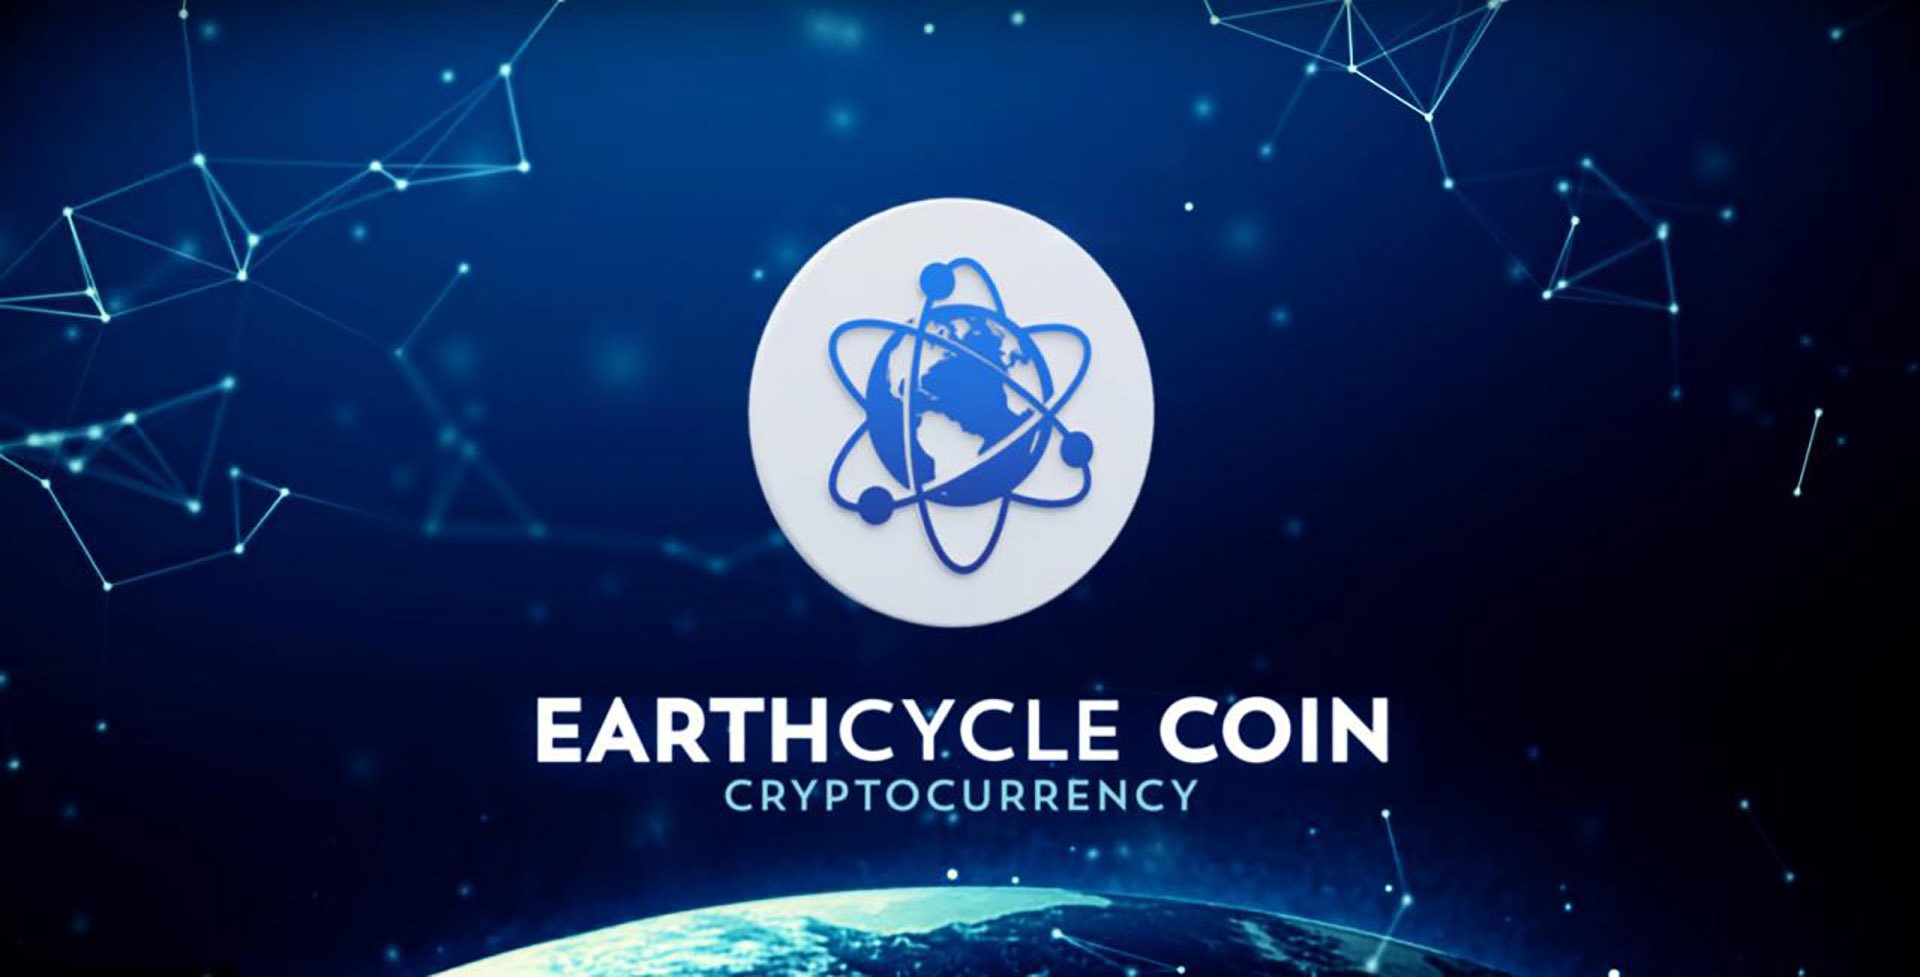 EarthCycle (ECE) Coin Powers a Decentralized Funding Pool Backed by Real World Business Revenues